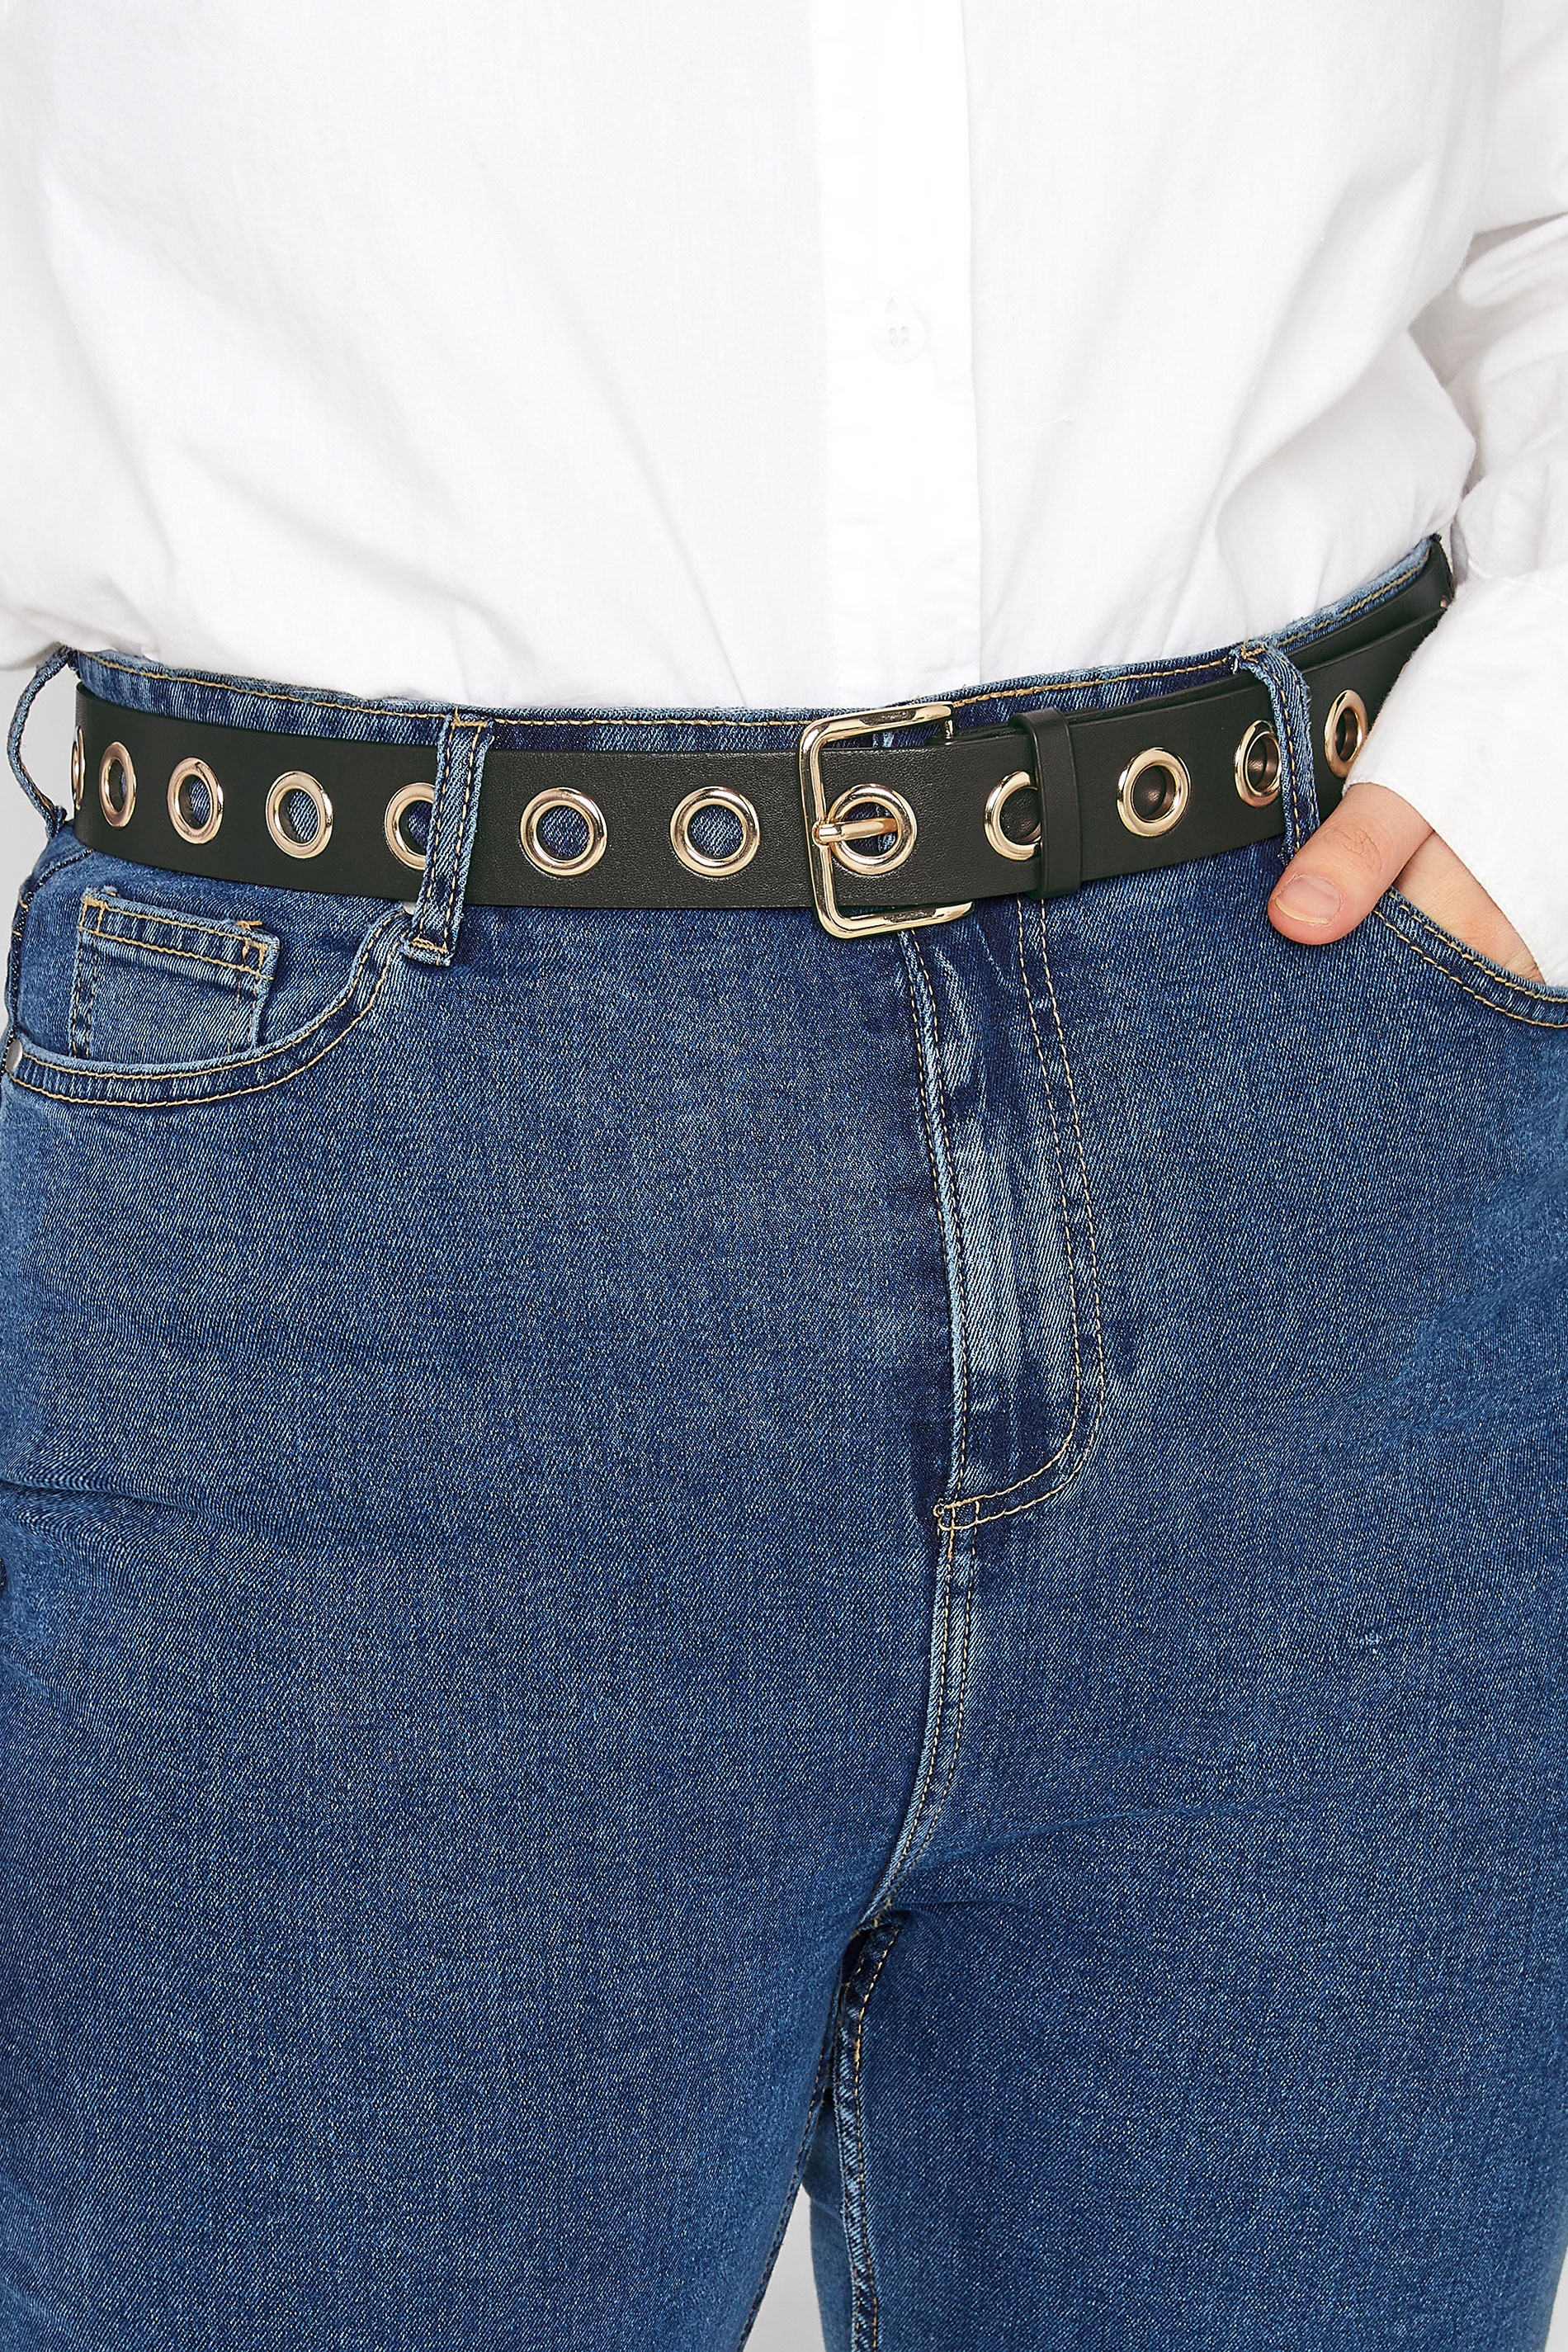 Brown Eyelet Belt | Yours Clothing 1